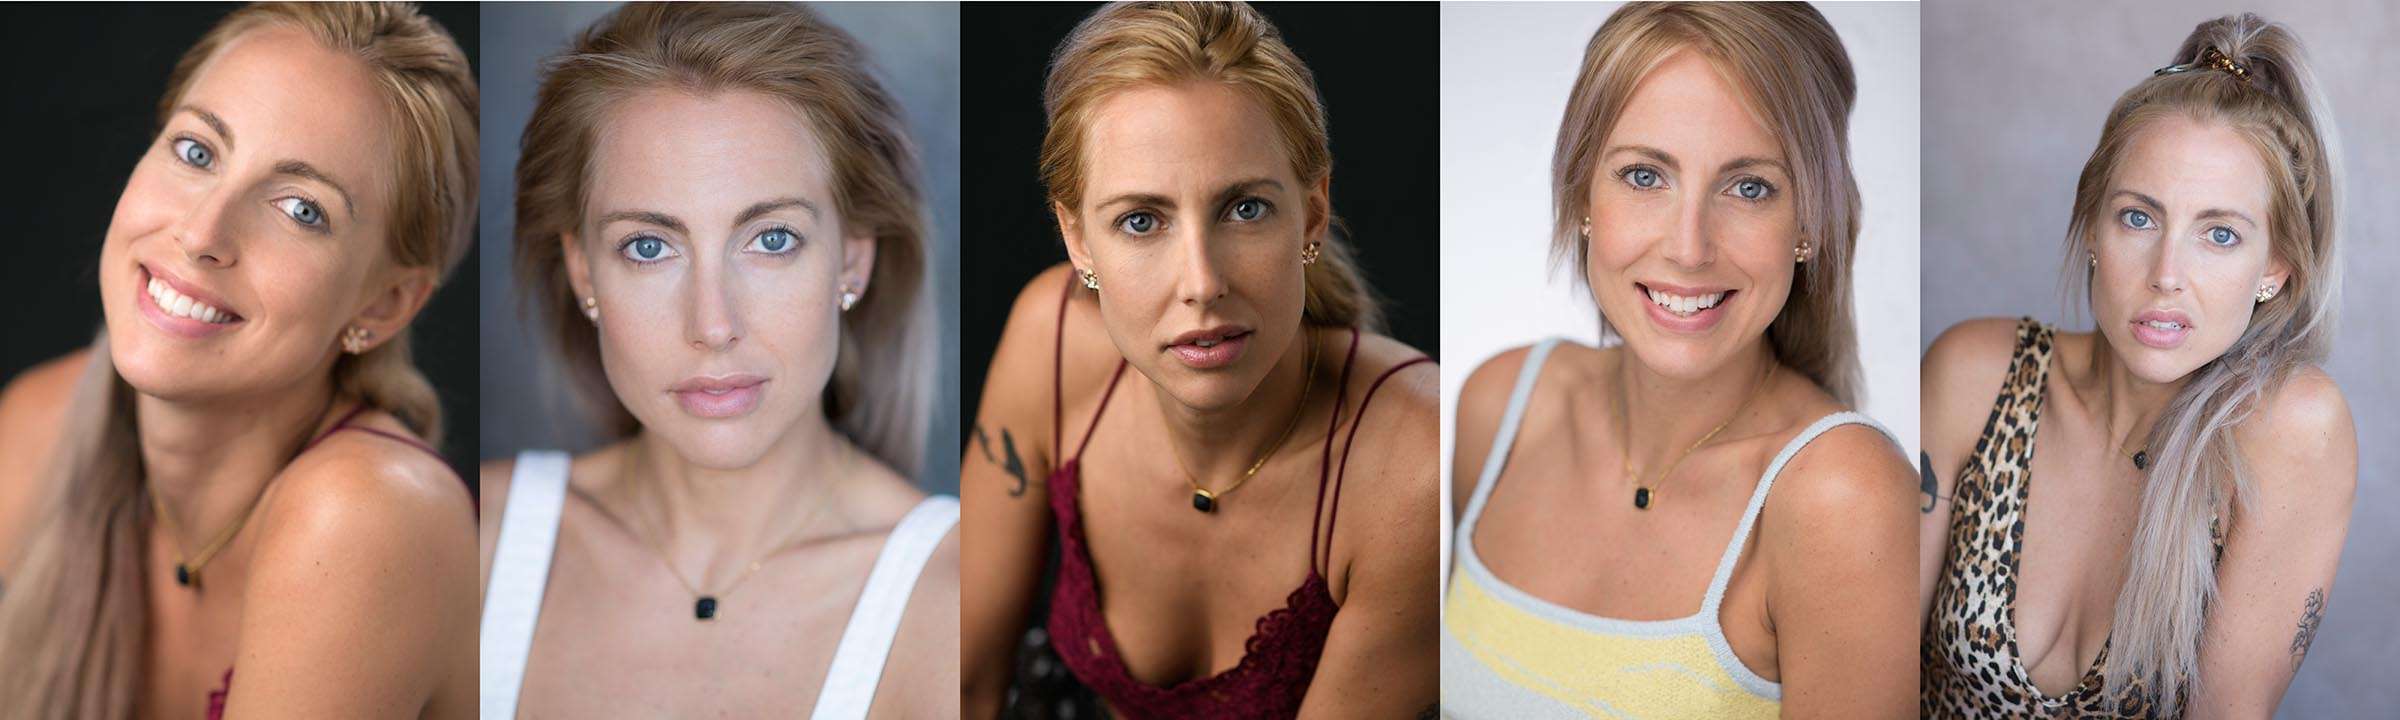 Actor Headshot Styles – What’s Your Type?